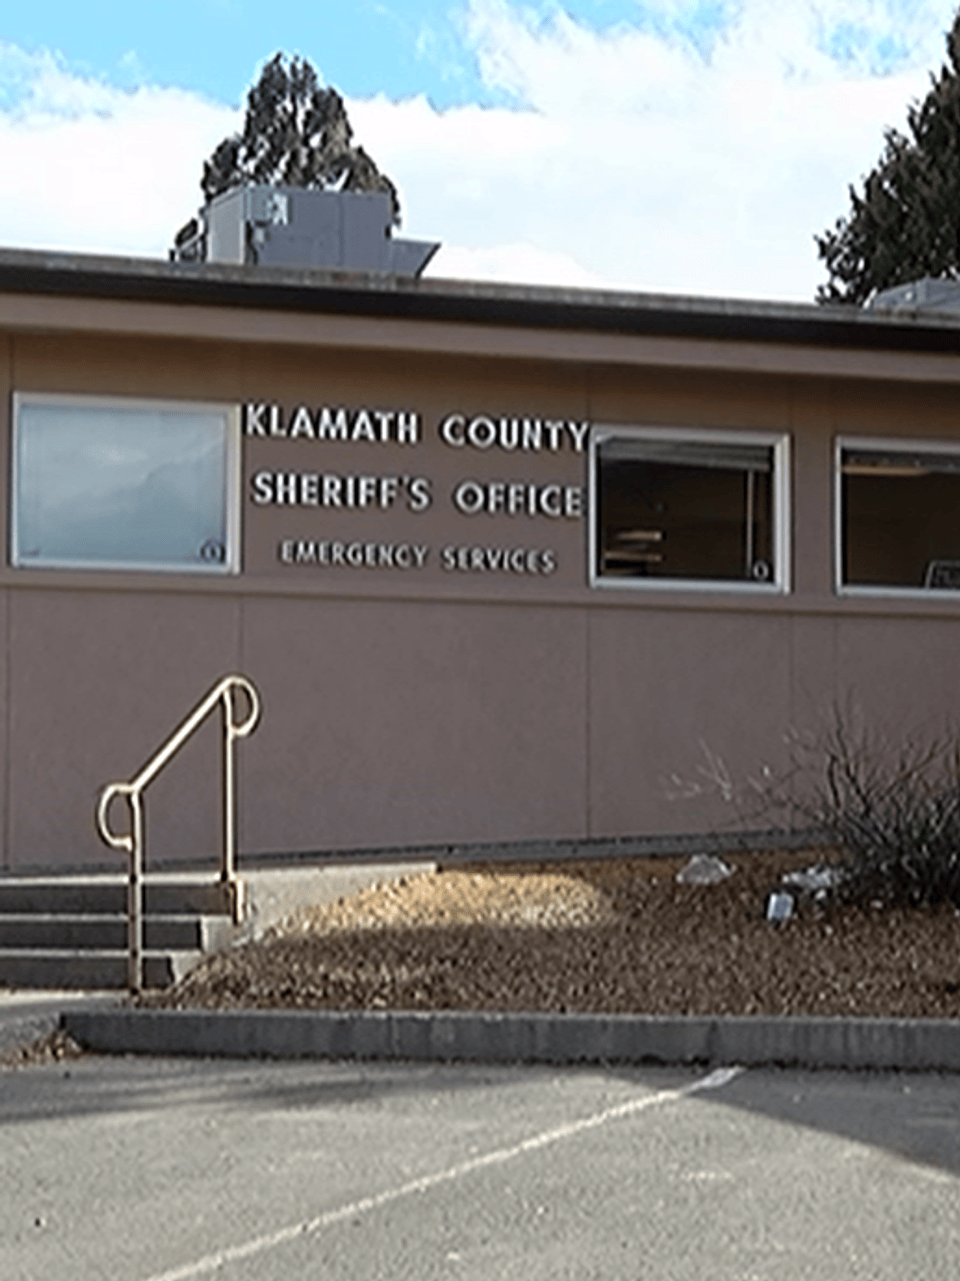 Image of Klamath County Sheriff's Office and Jail